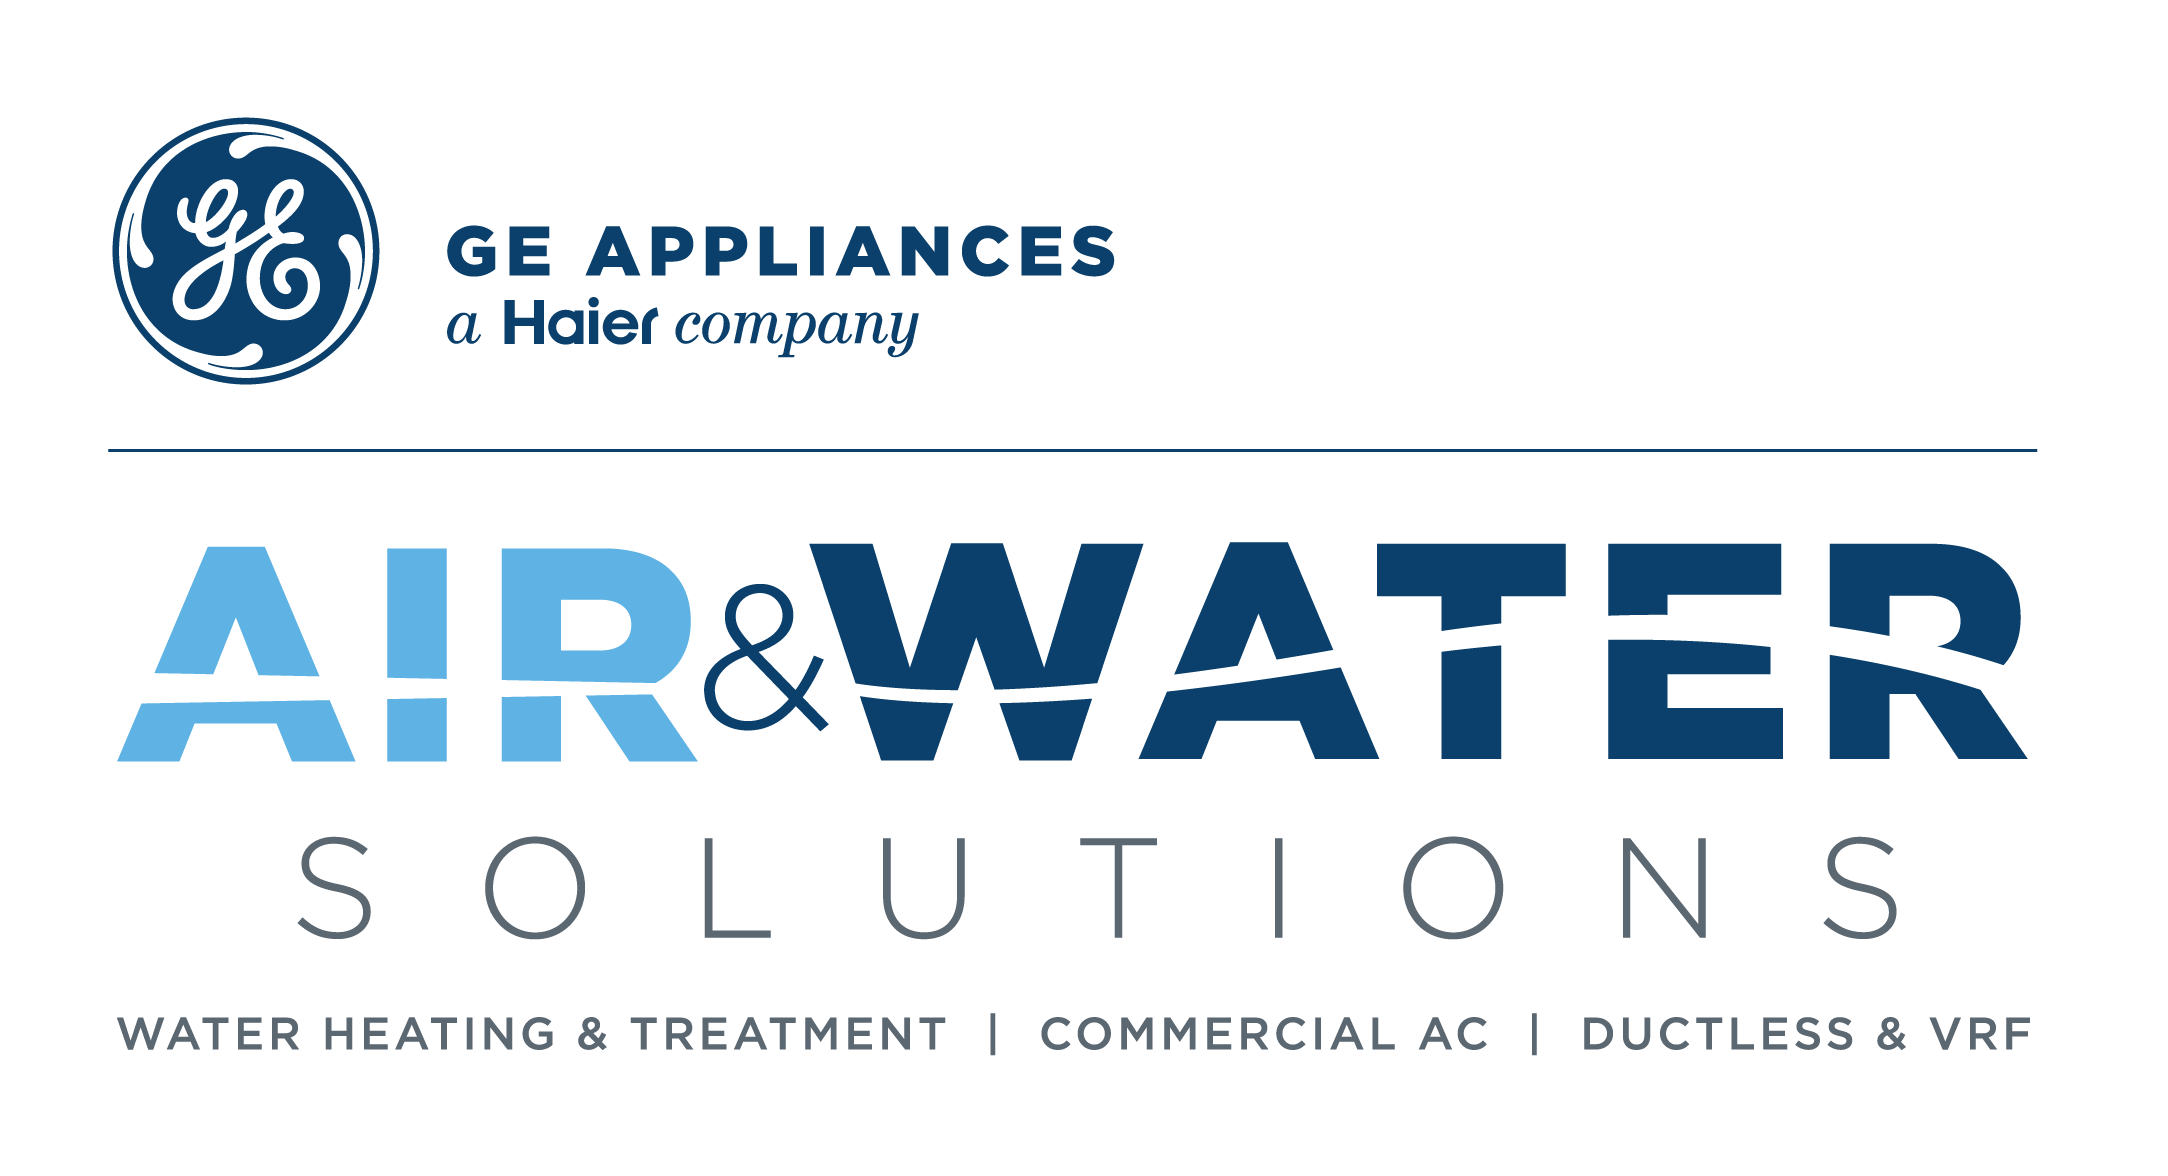 A green and blue logo for air & water solutions.